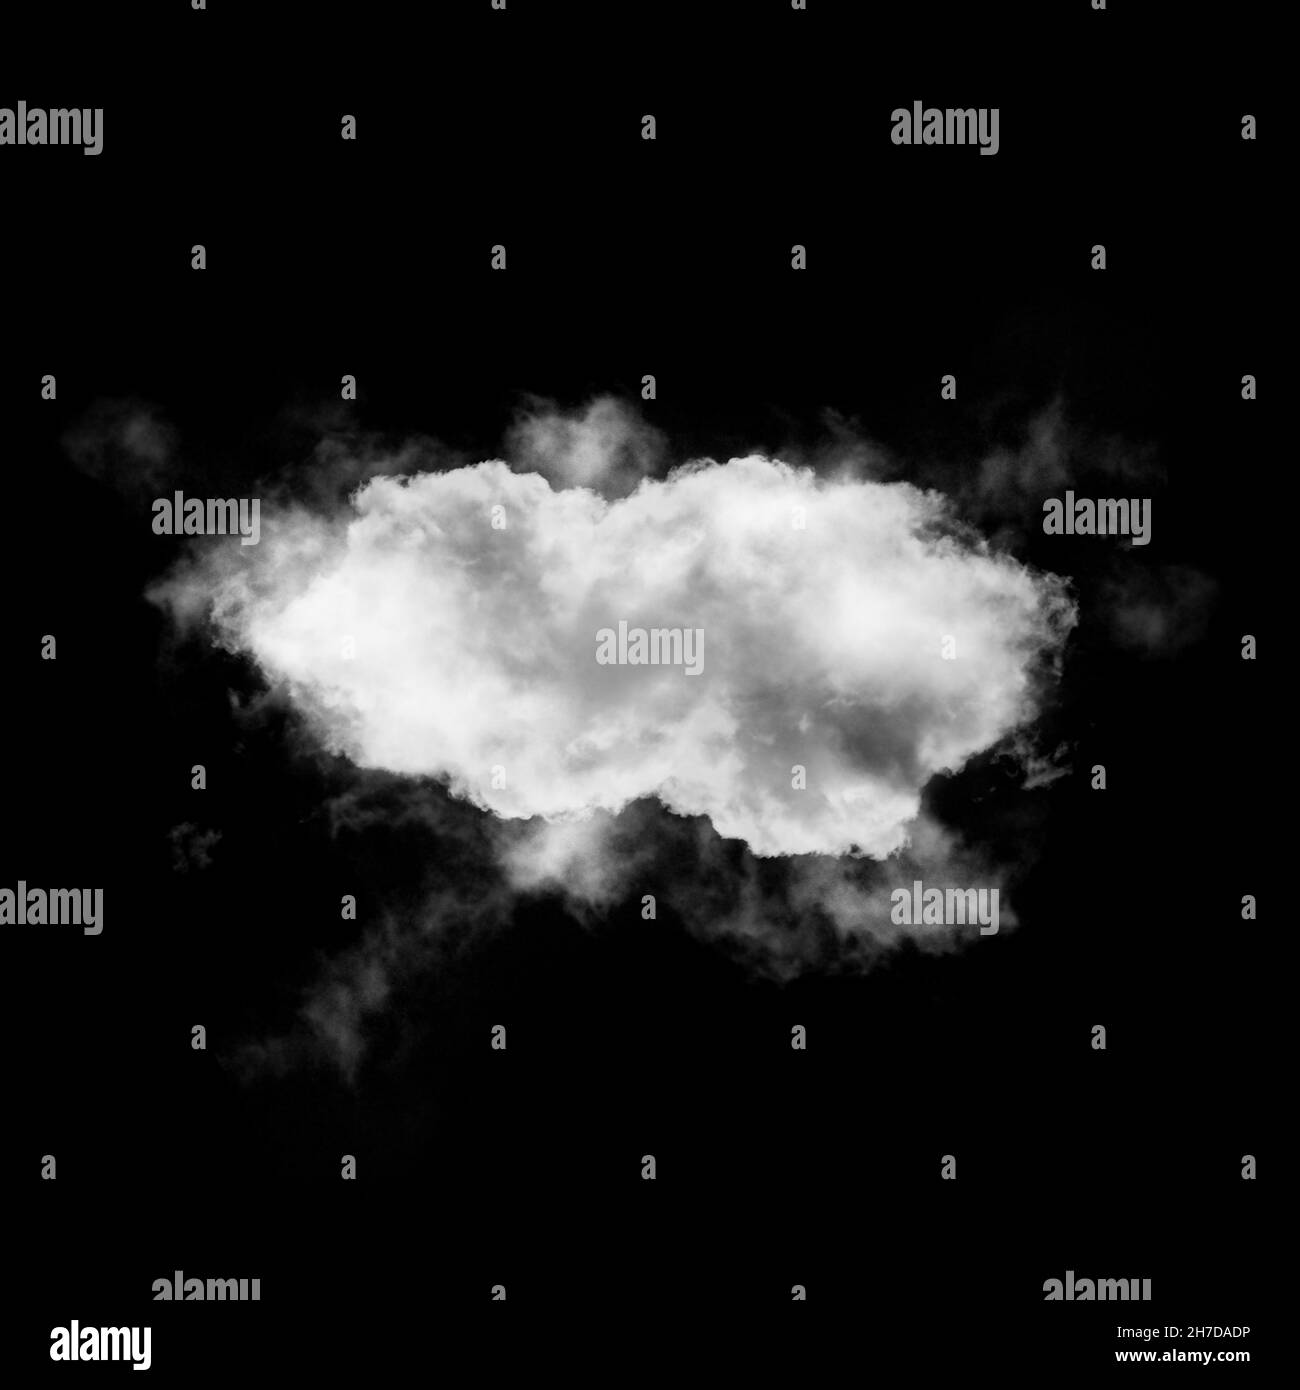 Clouds isolated over black background, illustration, drawing, 3D computer generated fluffy cloud shape Stock Photo